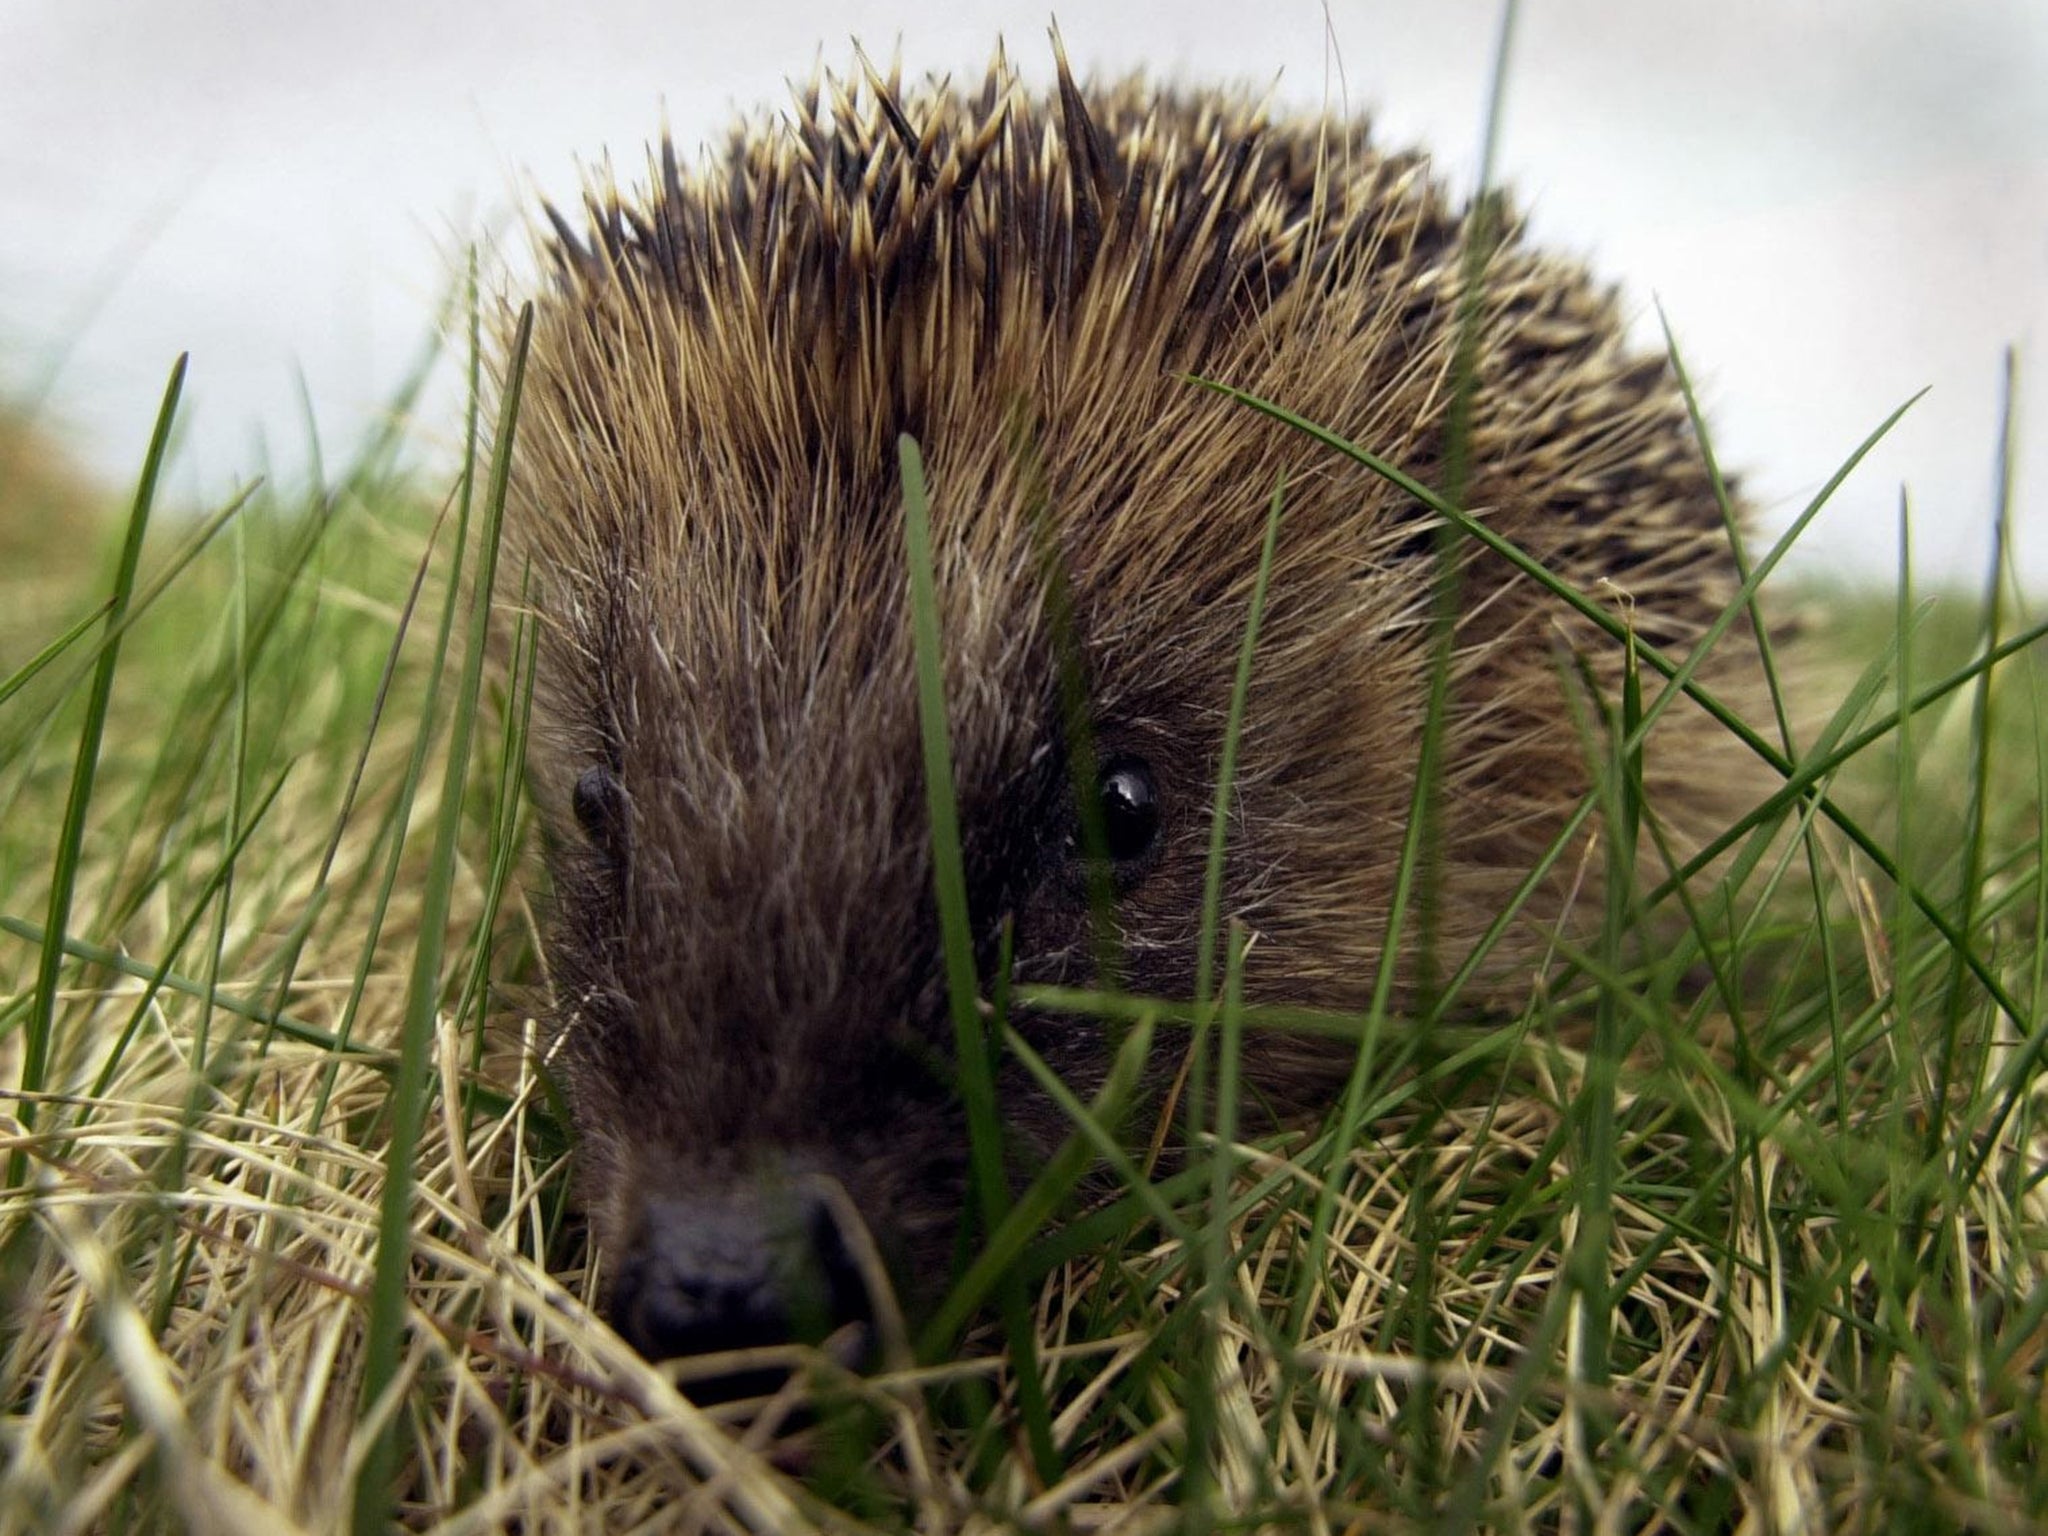 A captured hedgehog is being cared for in North Uist, and will be released once taken back to the mainland of Britain. A mass cull of thousands of hedgehogs was began in a bid to protect rare wader birds on a remote group of islands.